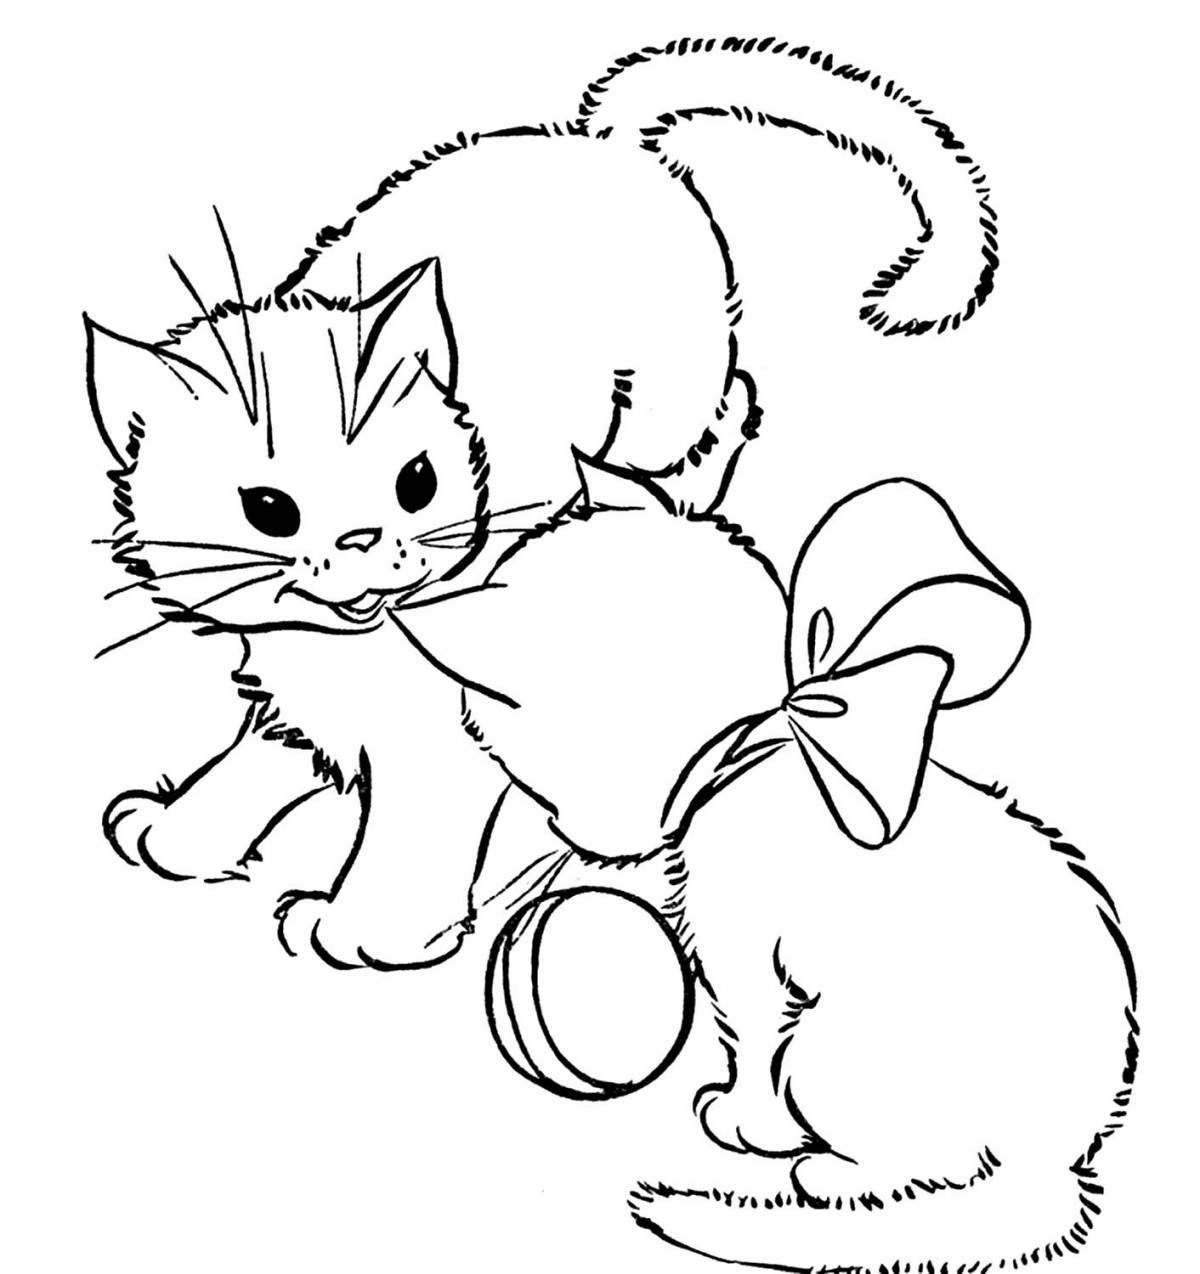 Quirky kitty girls coloring book